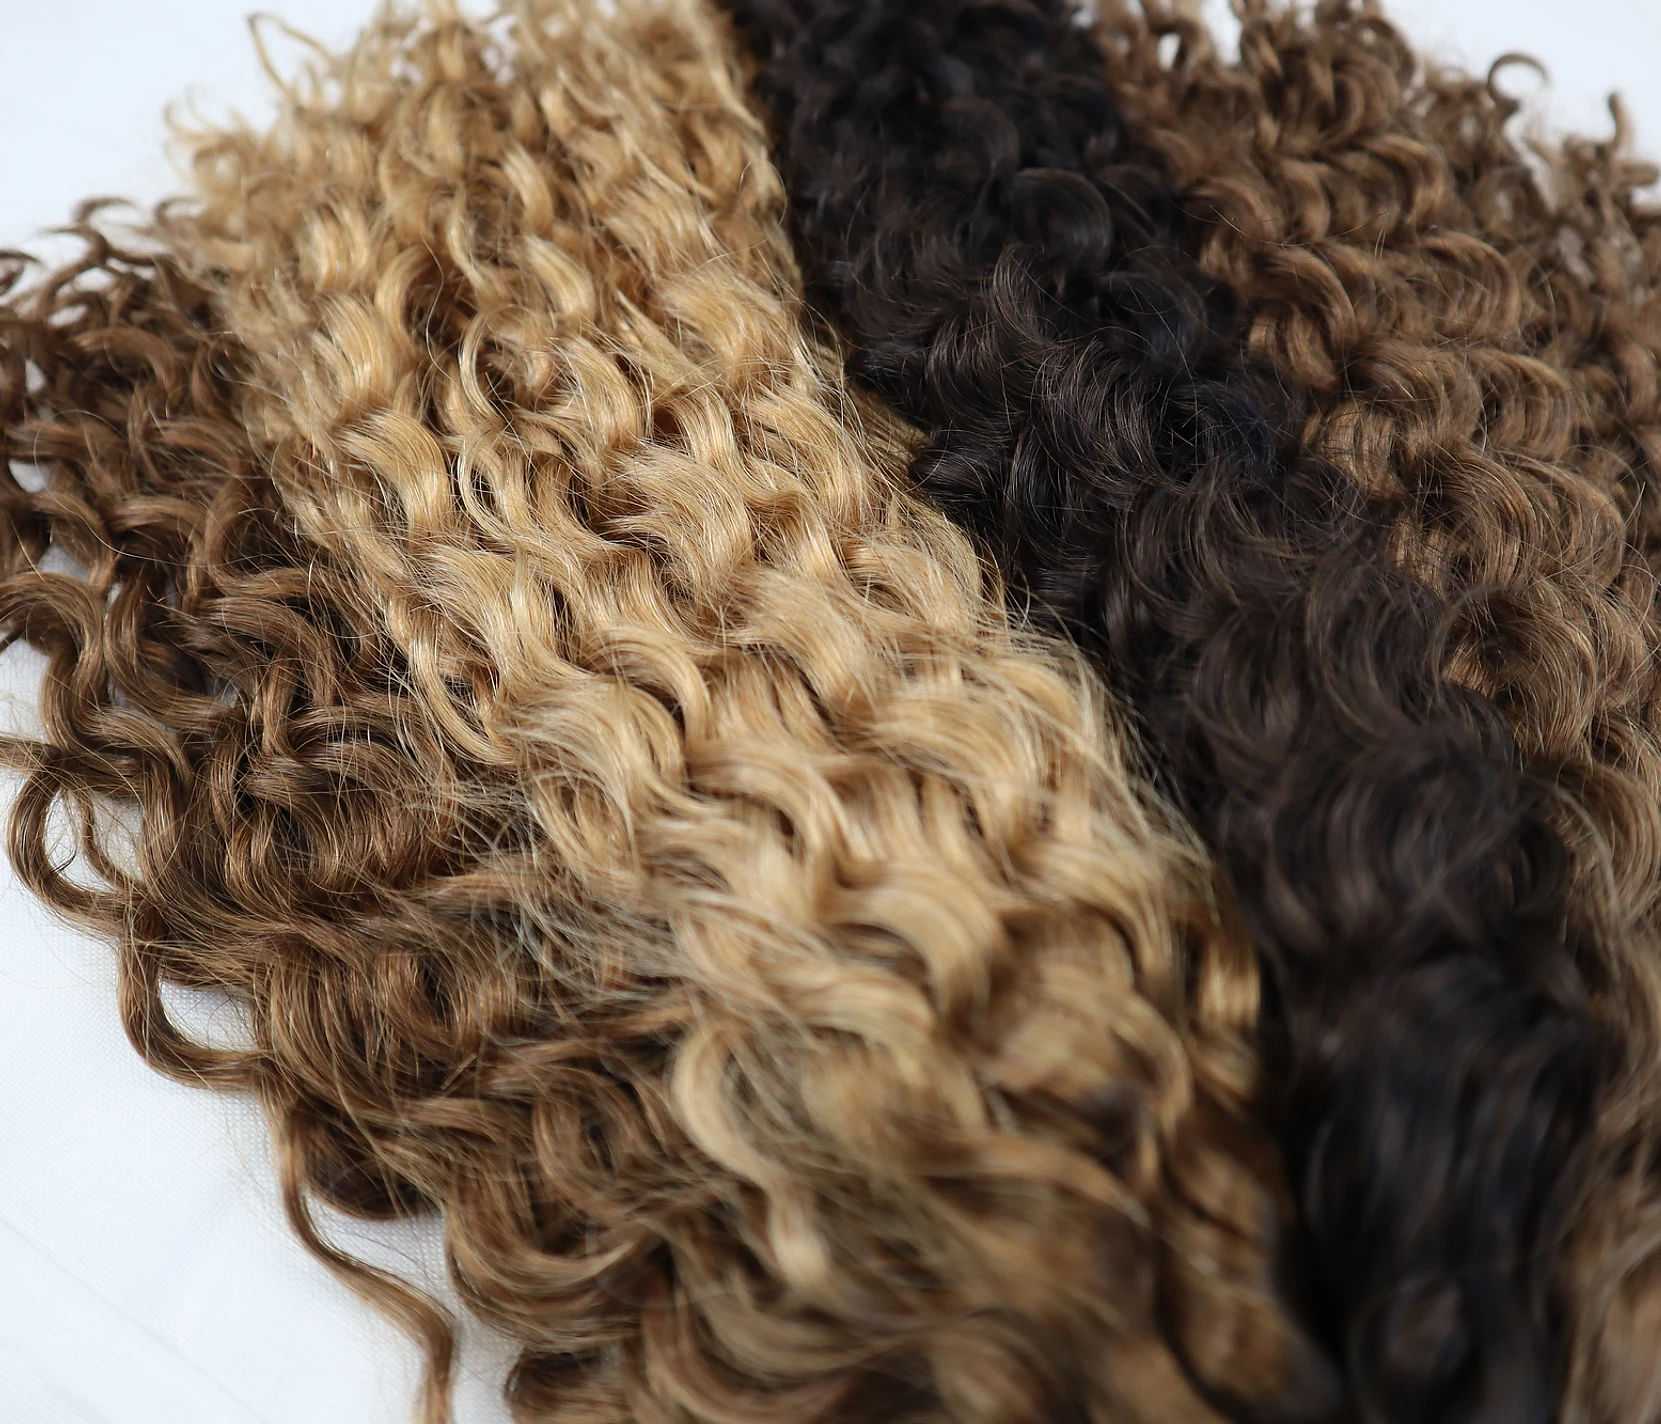 Different shades of curly hair extensions spread out.